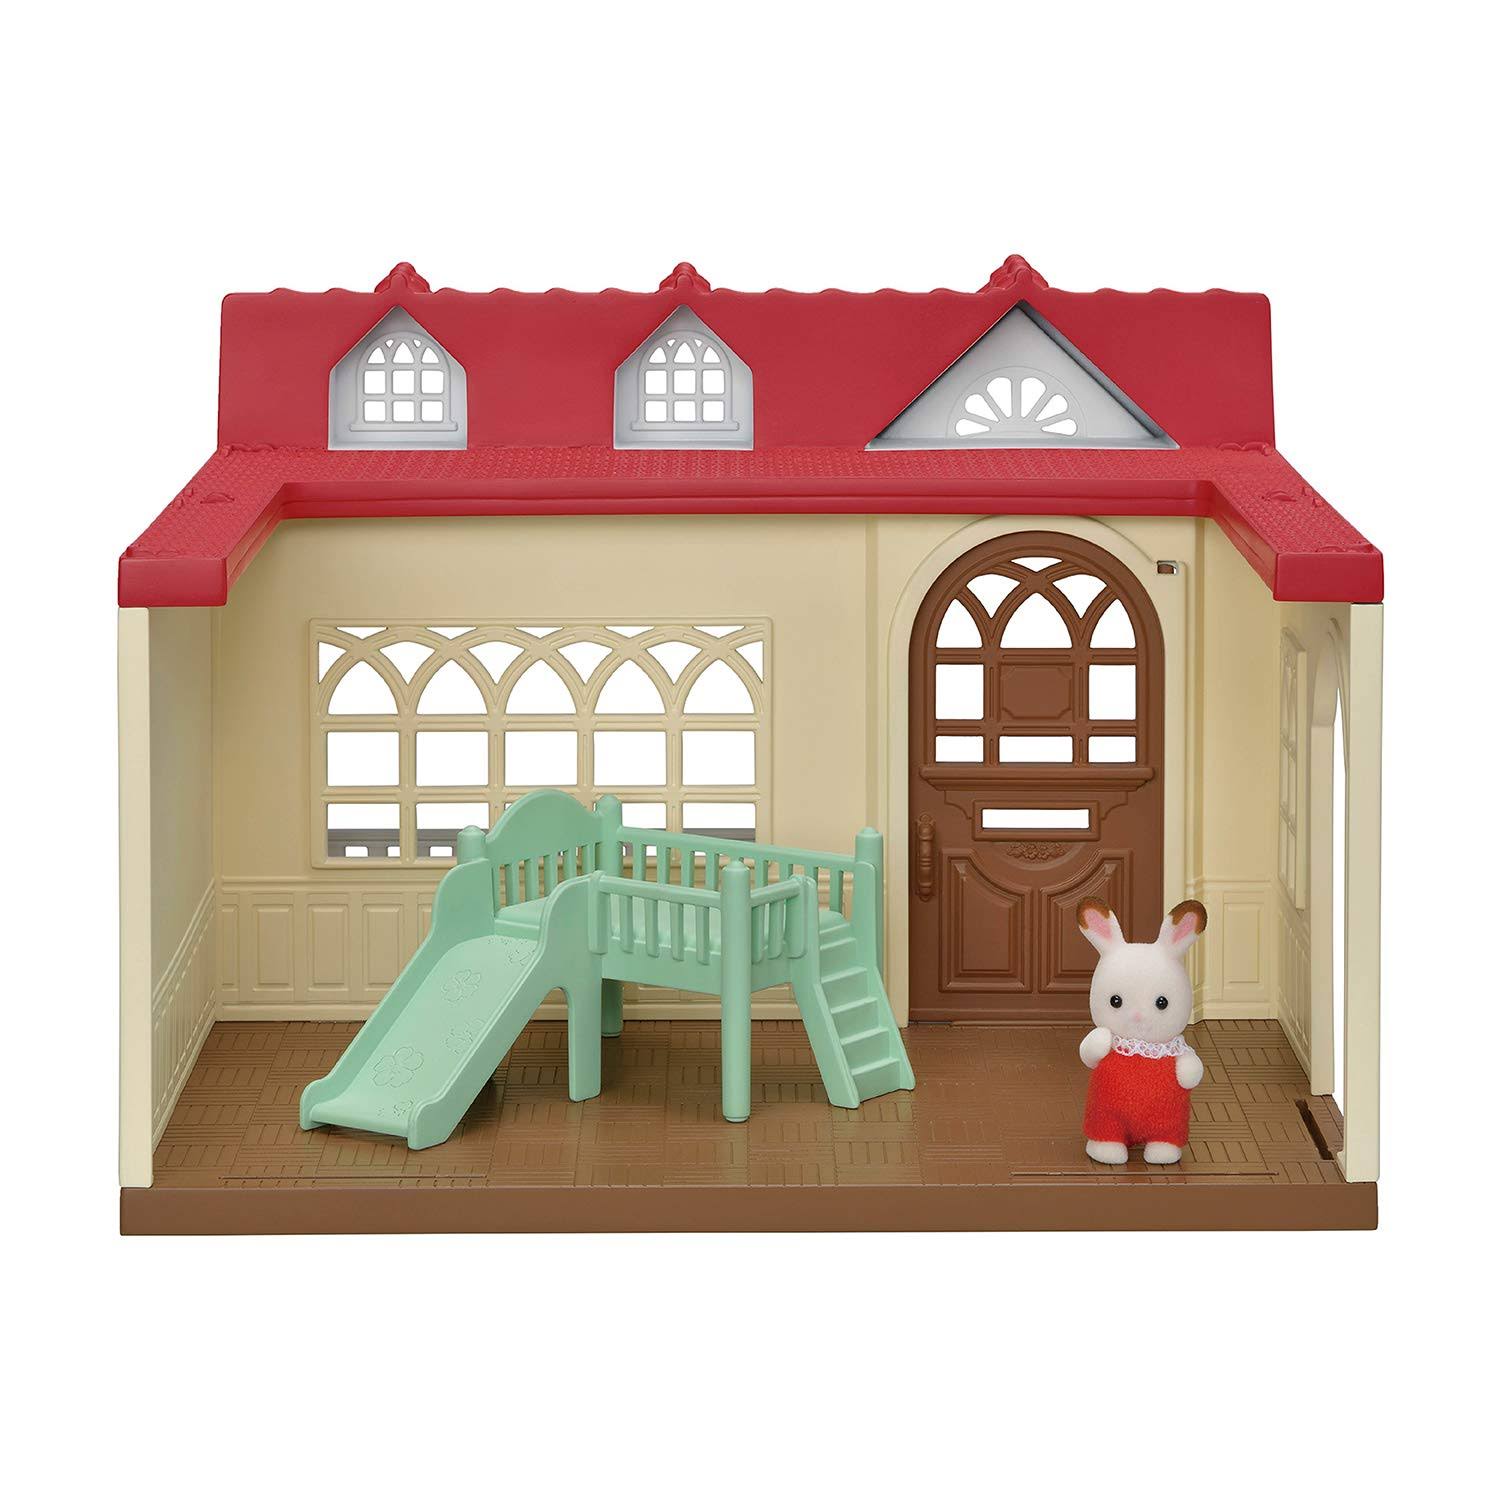 Calico Critters Sweet Raspberry Home Dollhouse Playset With Figure & Furniture Included